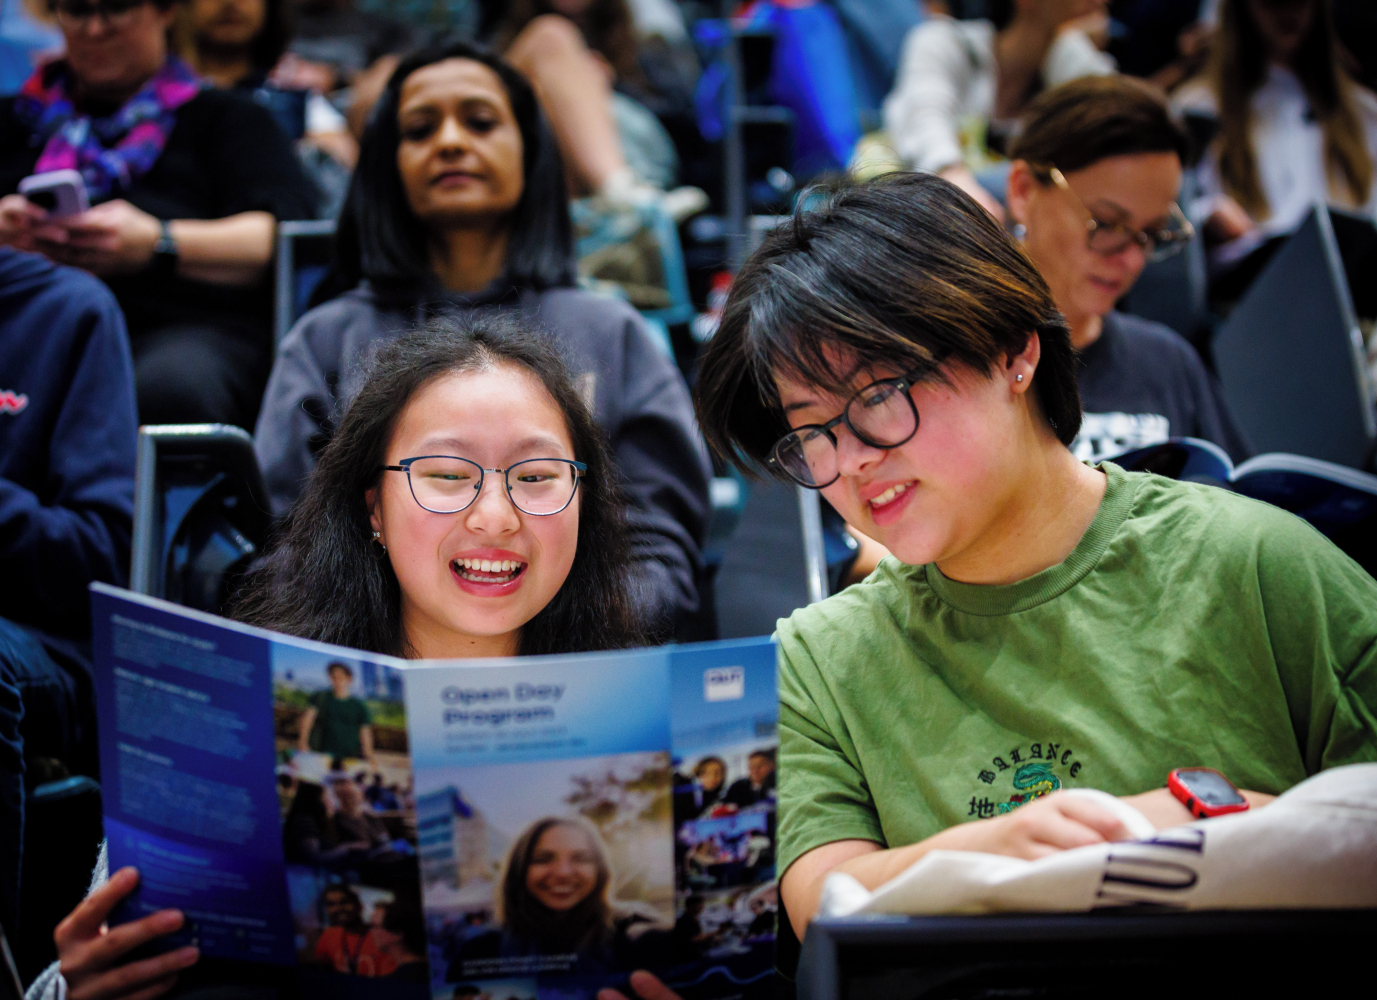 How to make the most out of QUT Open Day